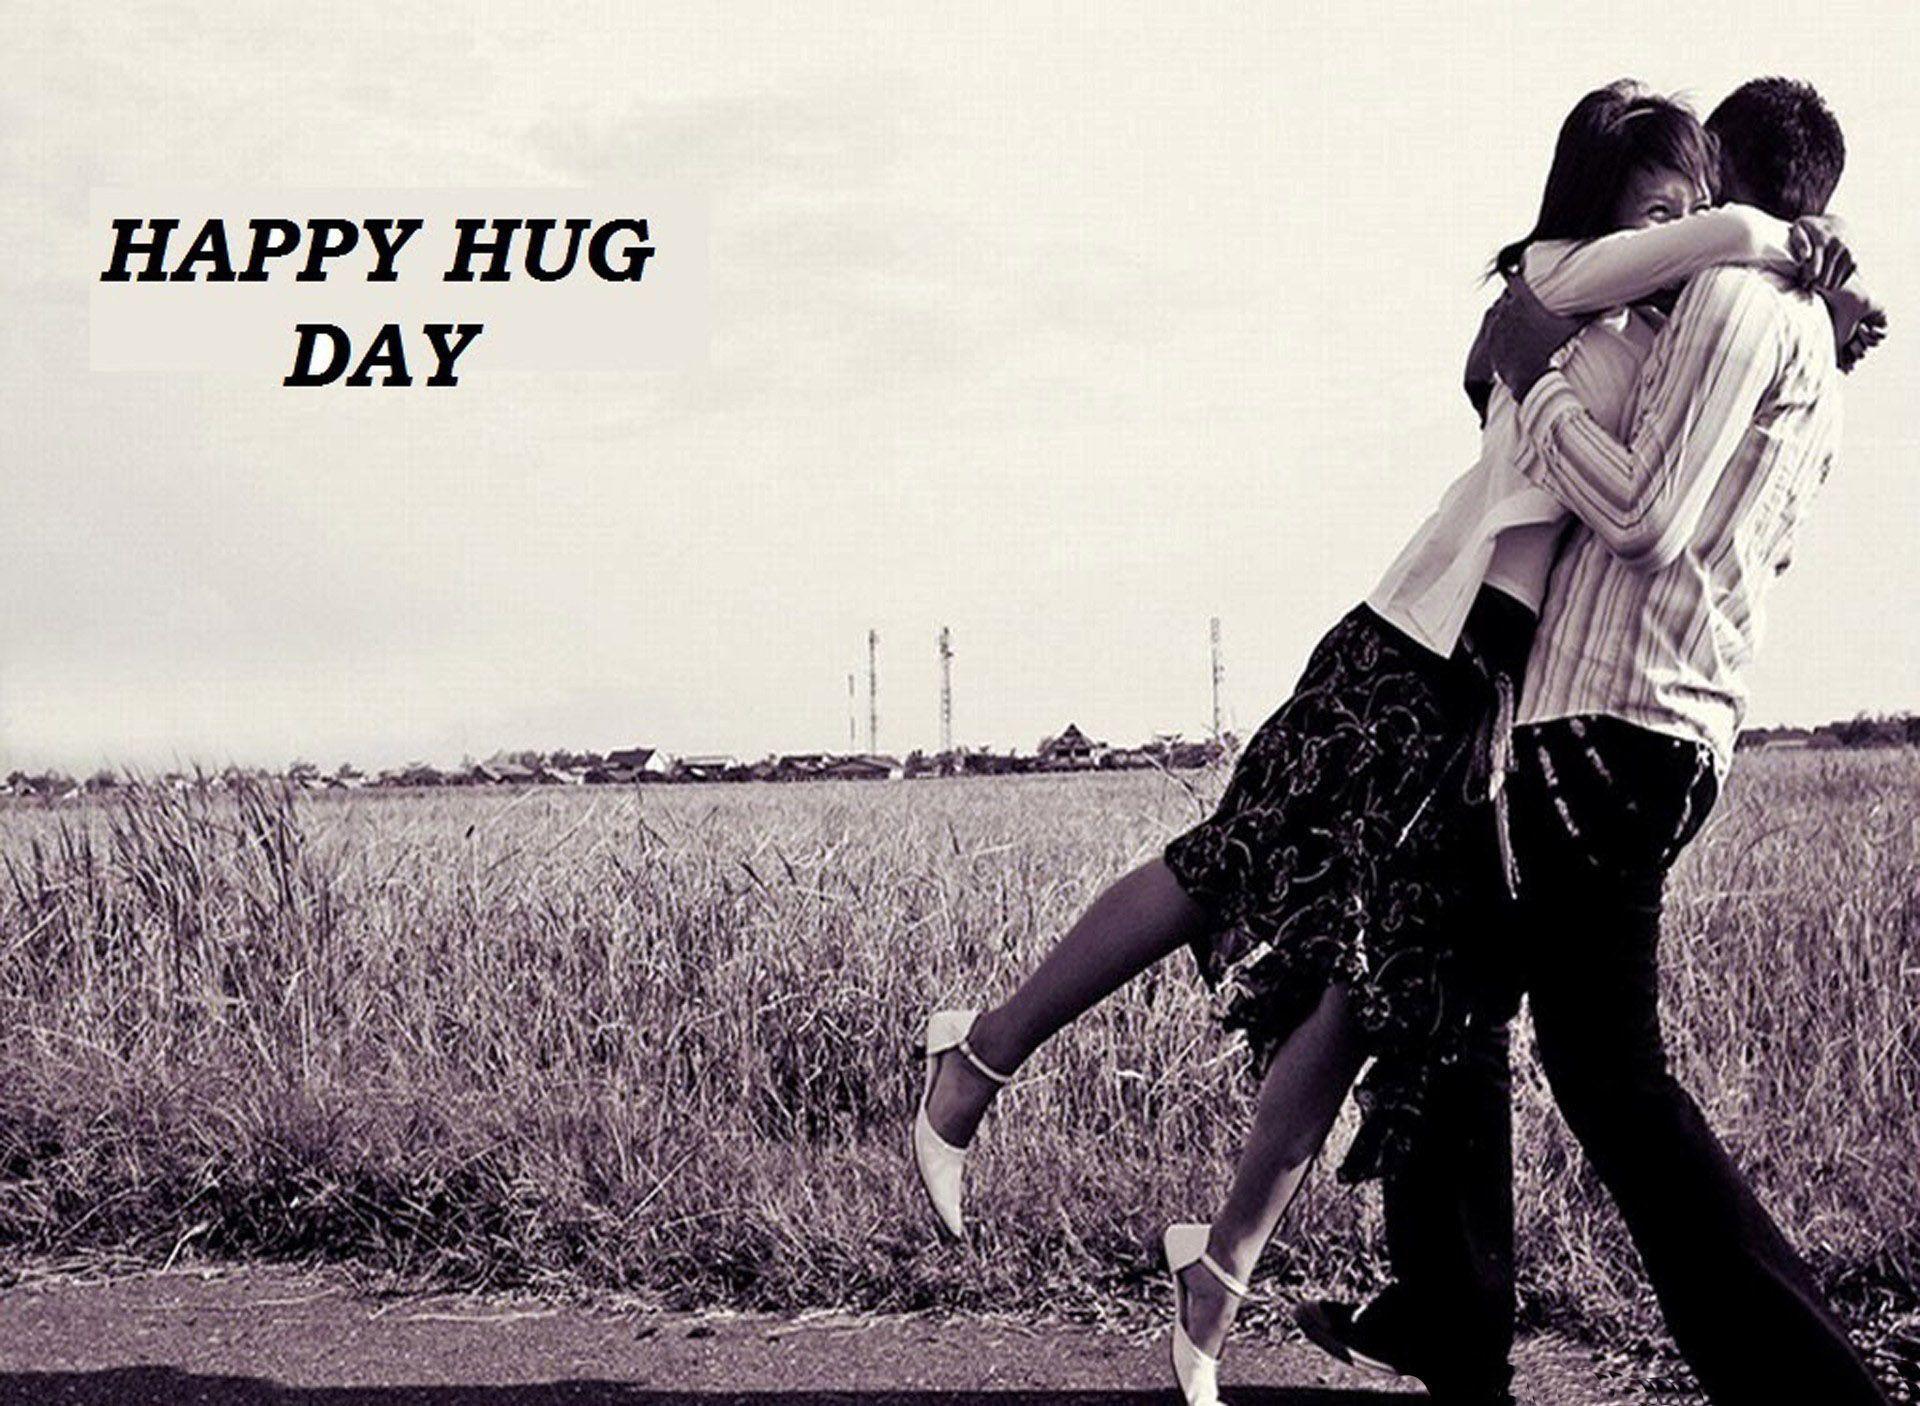 Happy Hug Day 2016 Image, Cute Picture, Romantic Quotes & SMS